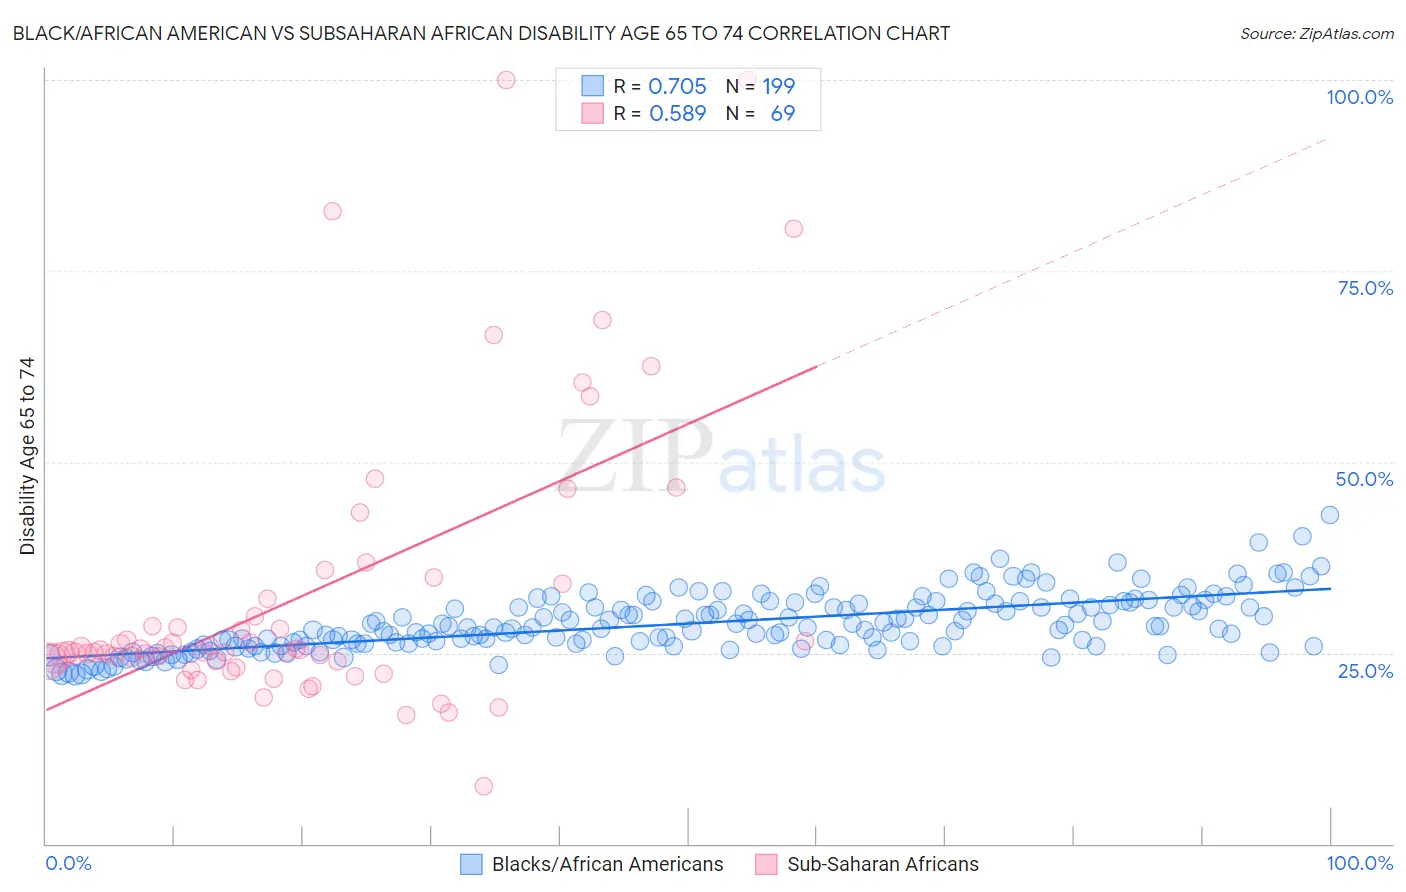 Black/African American vs Subsaharan African Disability Age 65 to 74